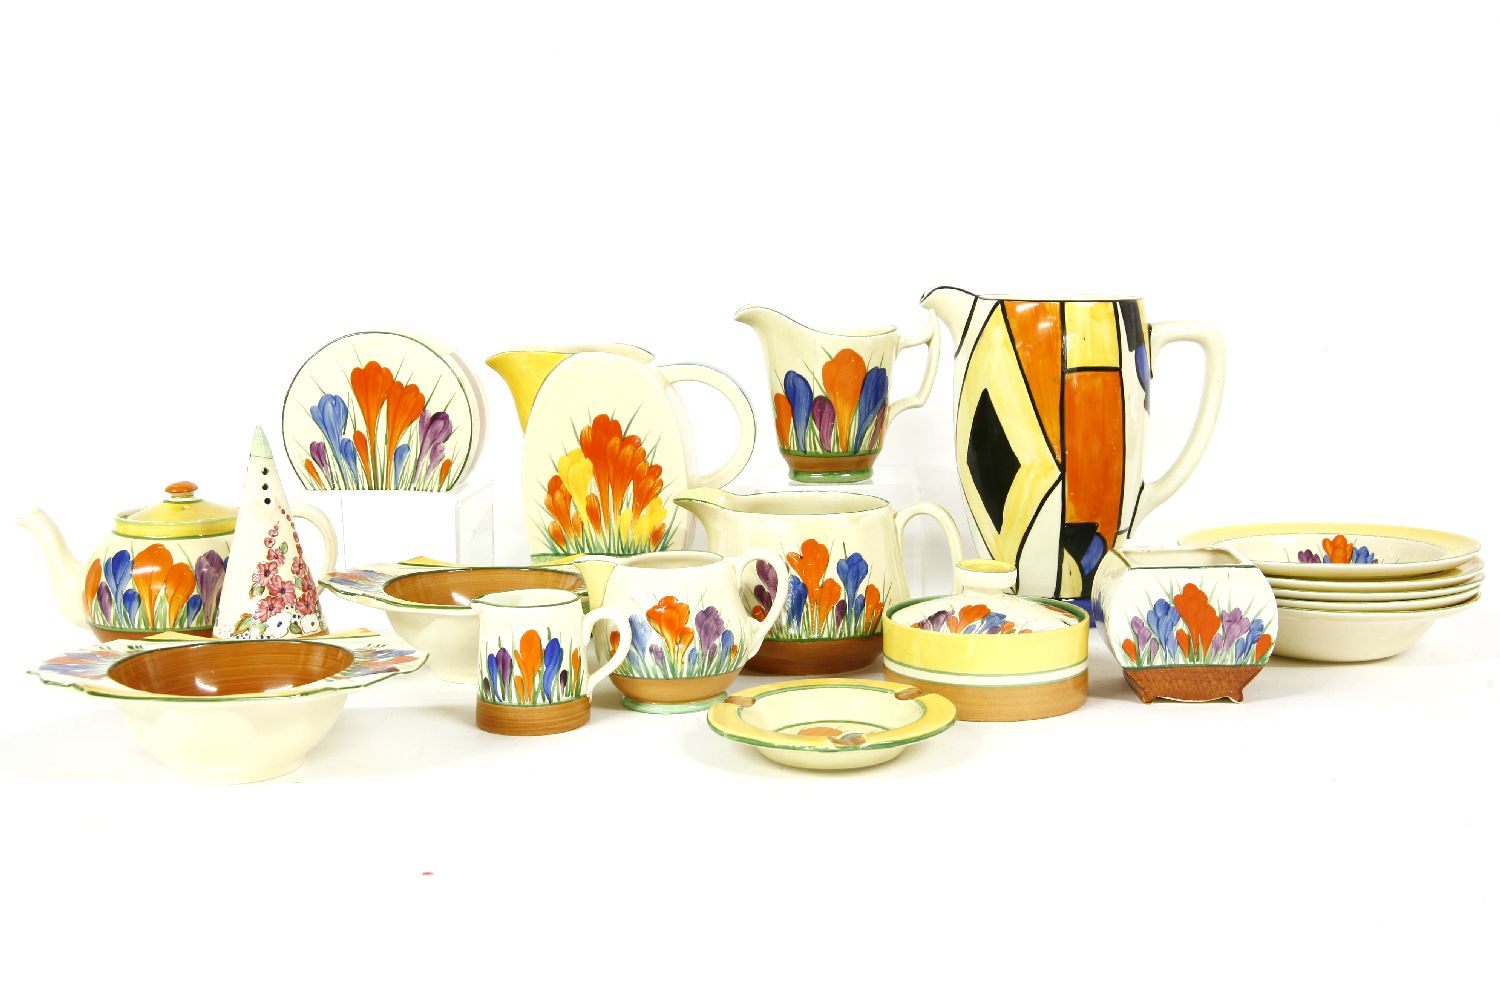 Clarice Cliff, a restored jug, 'Crocus' pattern items, a teapot, bowl and cover, ashtray, jugs,